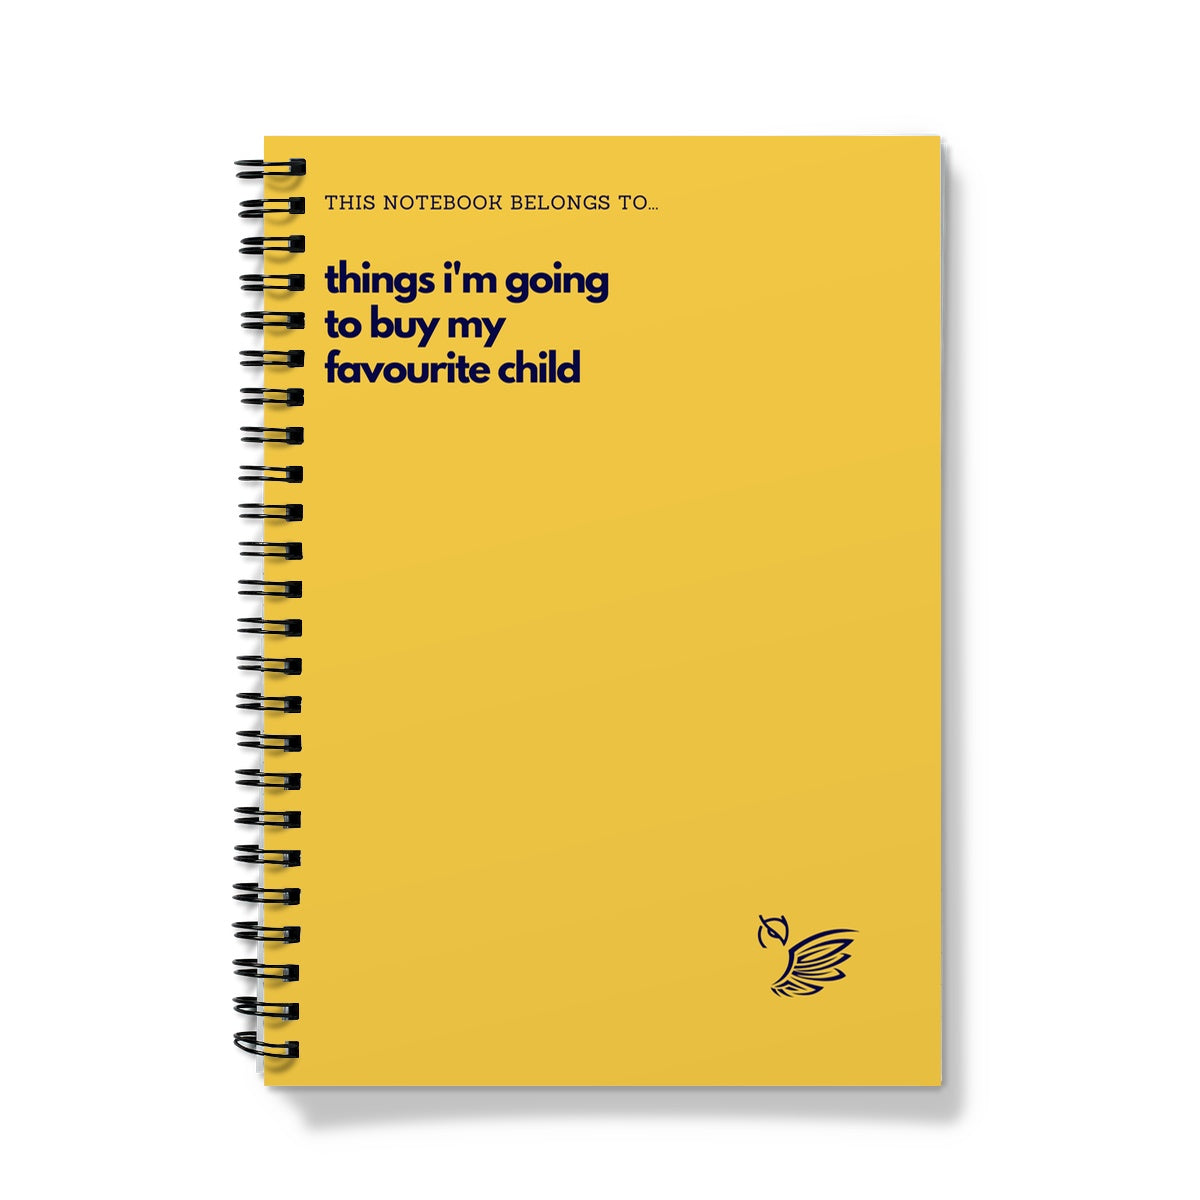 My Little Notebook Of... Things I'm Going To Buy My Favourite Child - Yellow Notebook